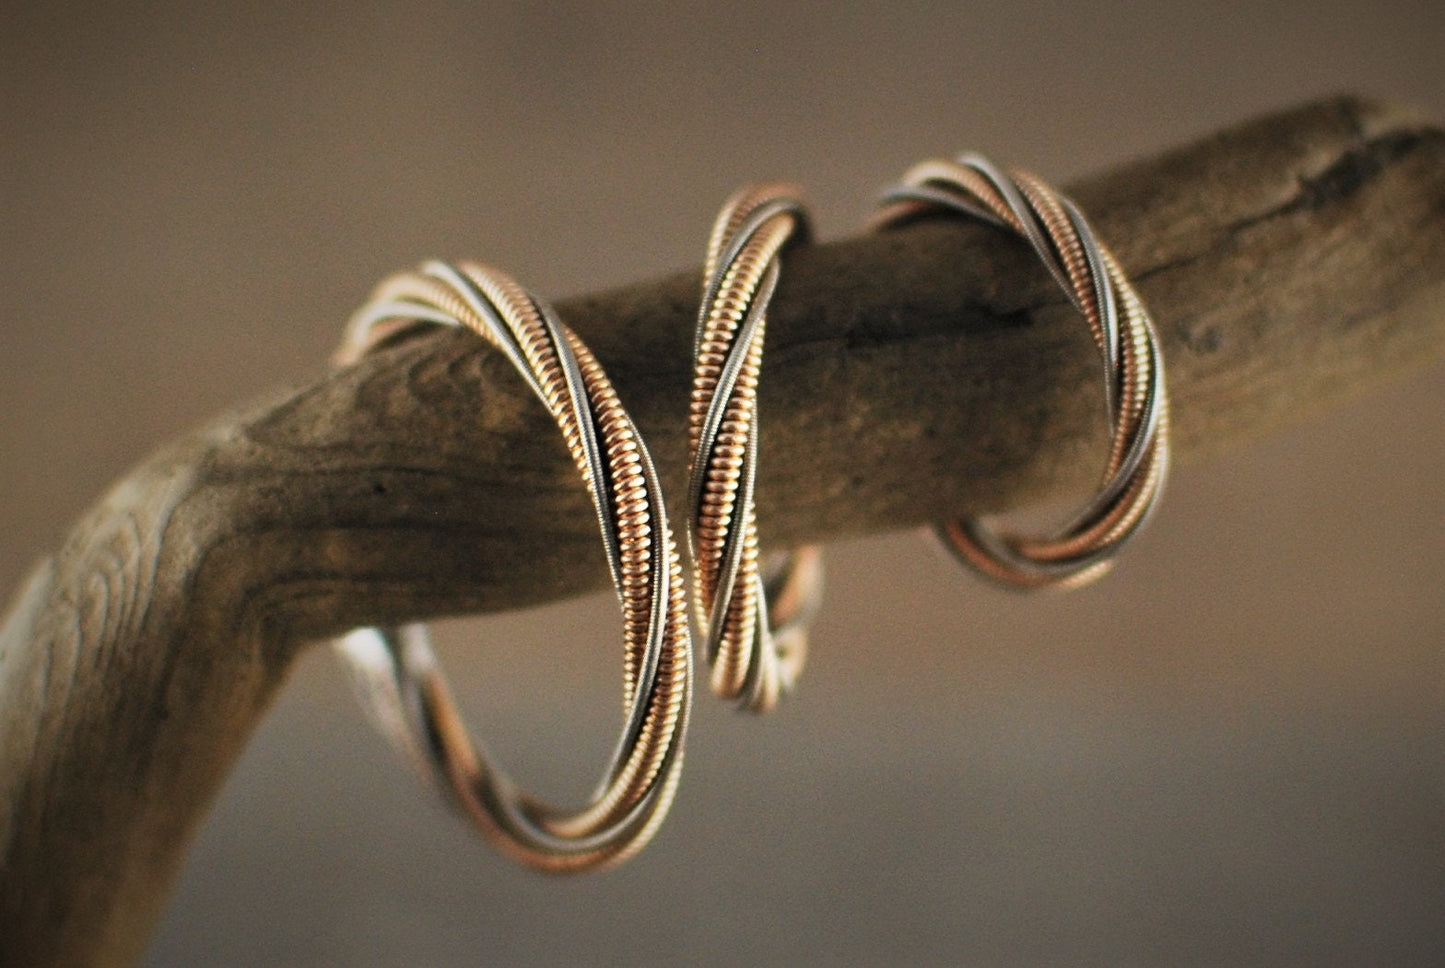 Guitar String Ring, Two Strings Twisted Together, Guitar String Jewelry, Guitar Gift, Gift for Guitarist, Copper Ring, Unique Ring, Acoustic